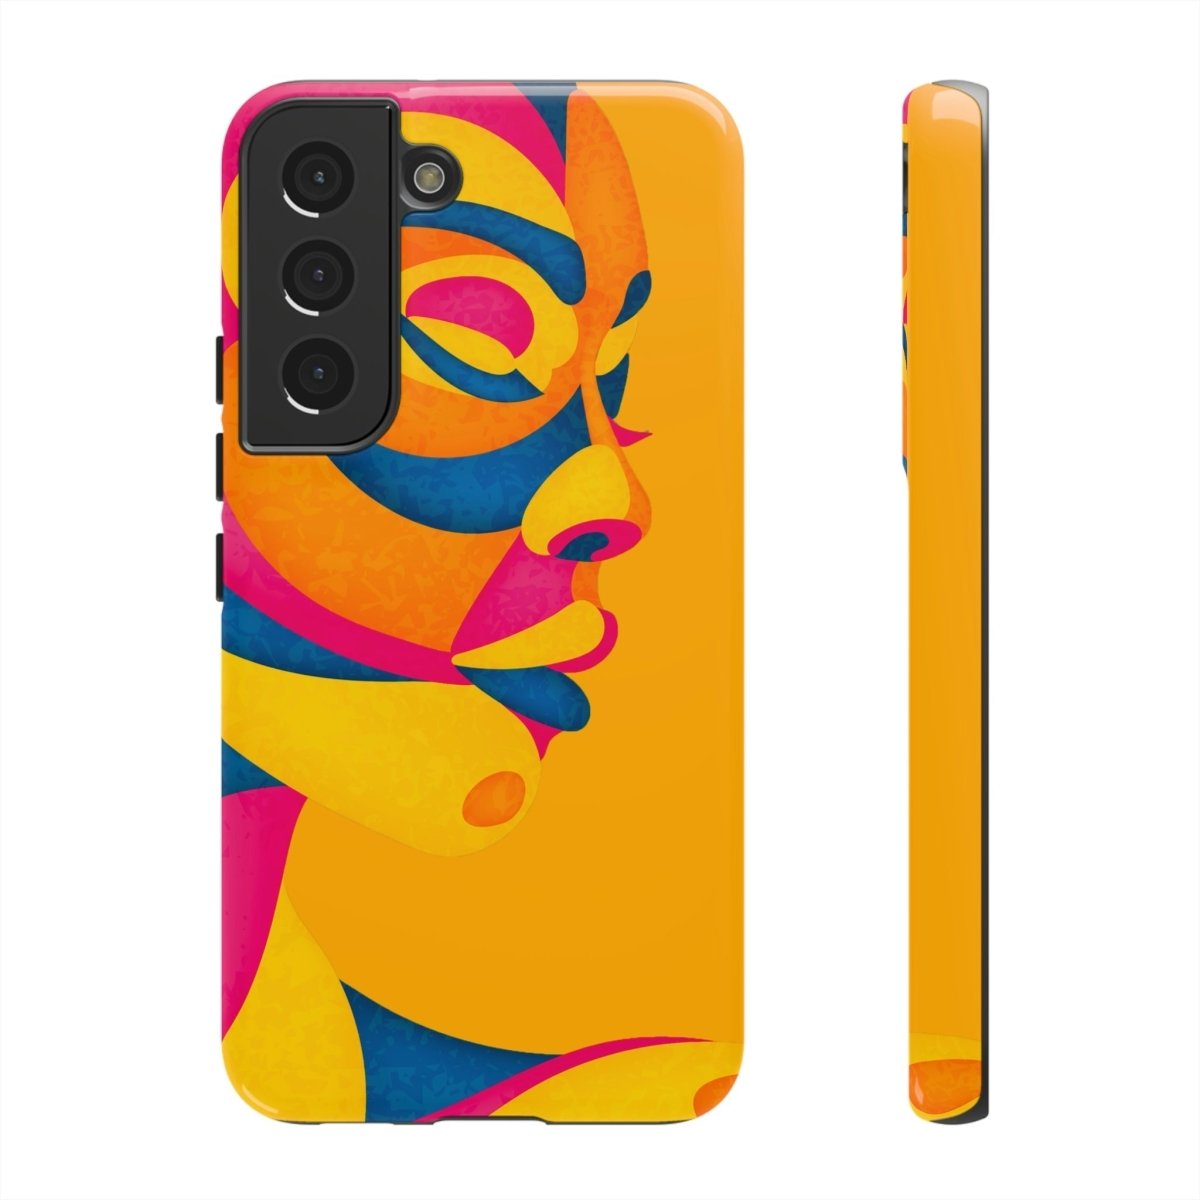 Colorful Face Phone Case - The Trini Gee